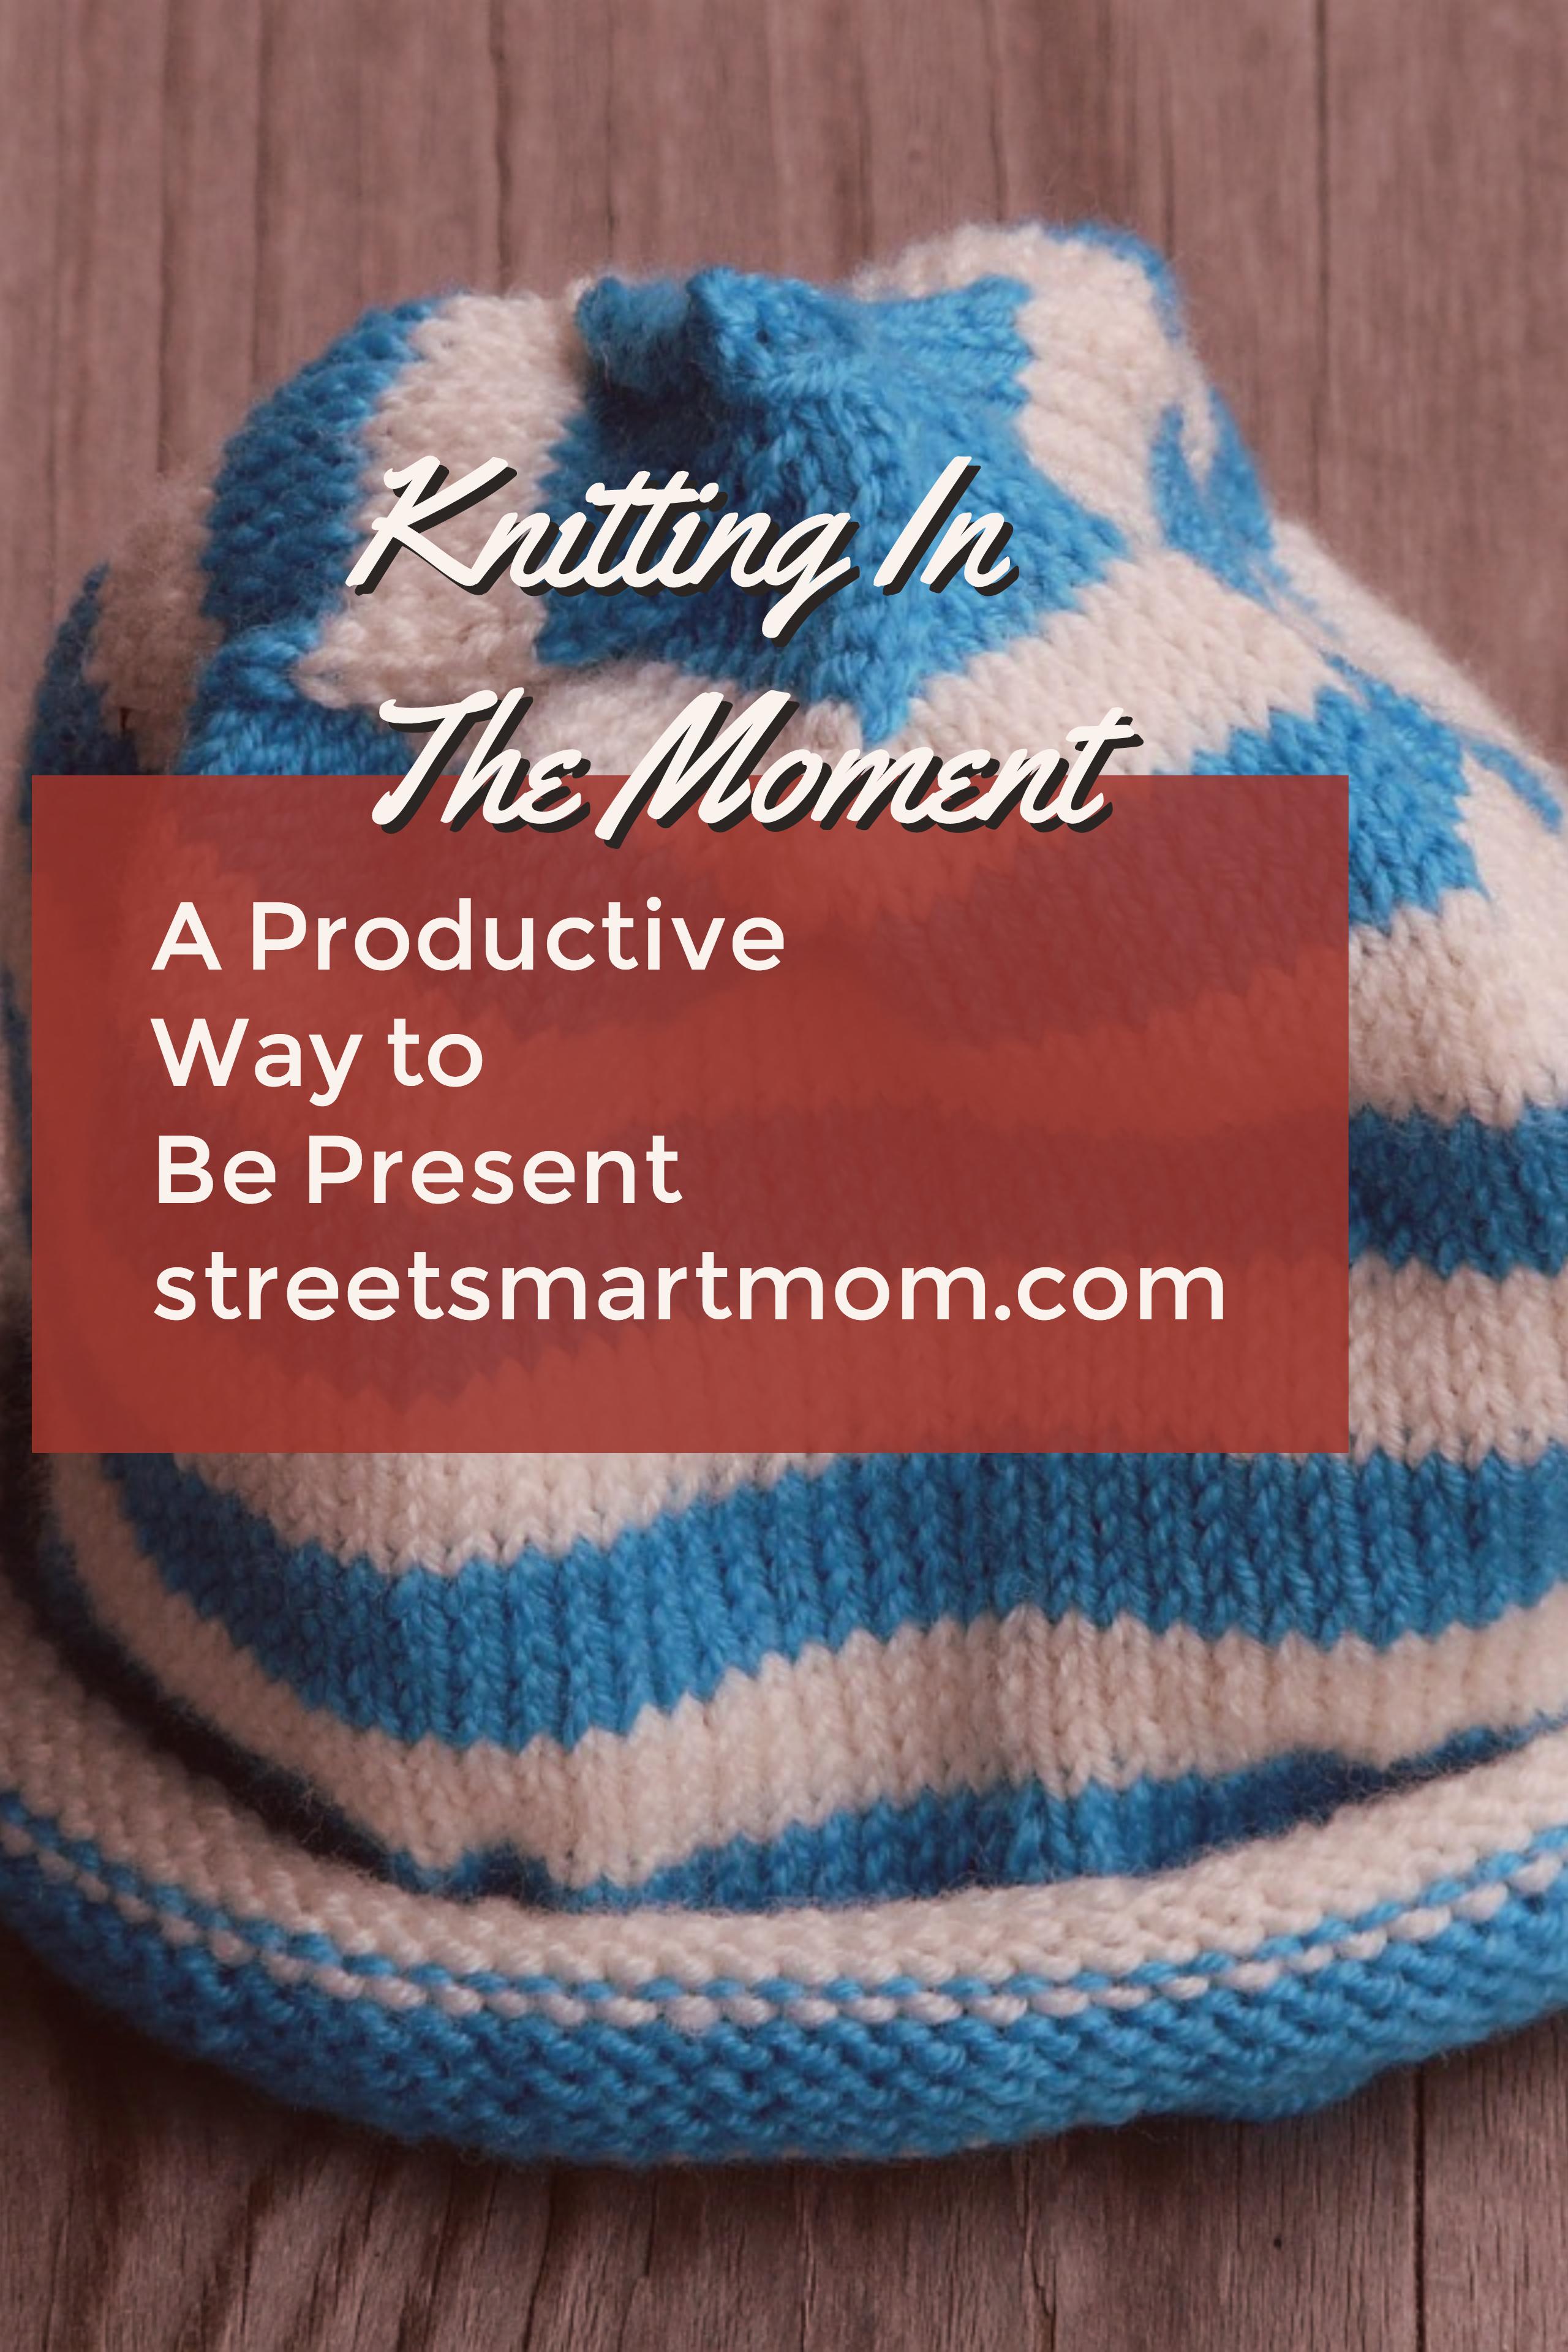 Knitting In The Moment—A Productive Way To Be Present